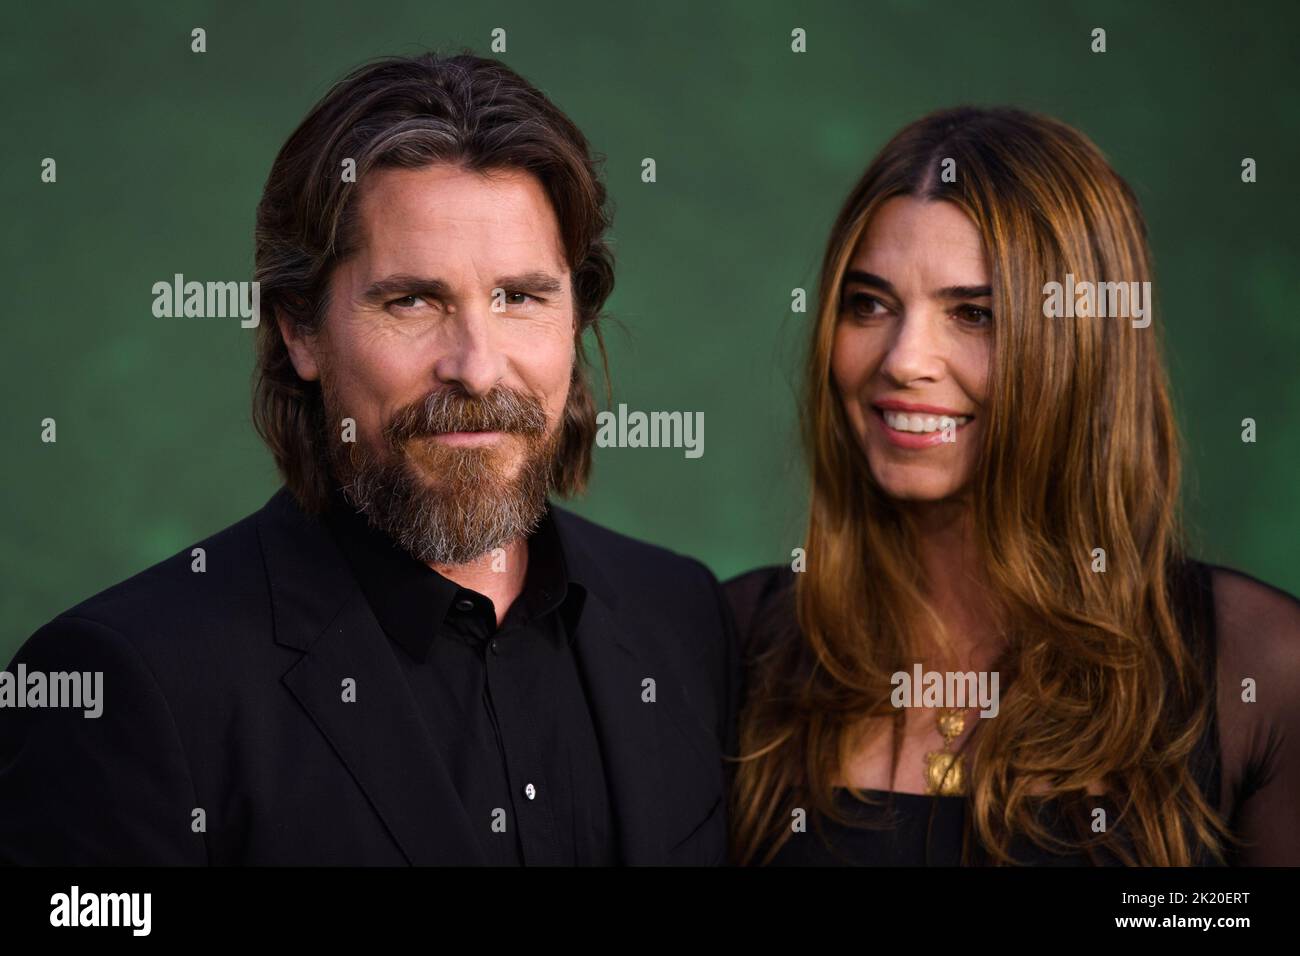 London, UK. 21 September 2022. Christian Bale and Sibi Blazic attending the European premiere of Amsterdam at the Odeon Luxe Leicester Square Cinema, London Picture date: Wednesday September 21, 2022. Photo credit should read: Matt Crossick/Empics/Alamy Live News Stock Photo